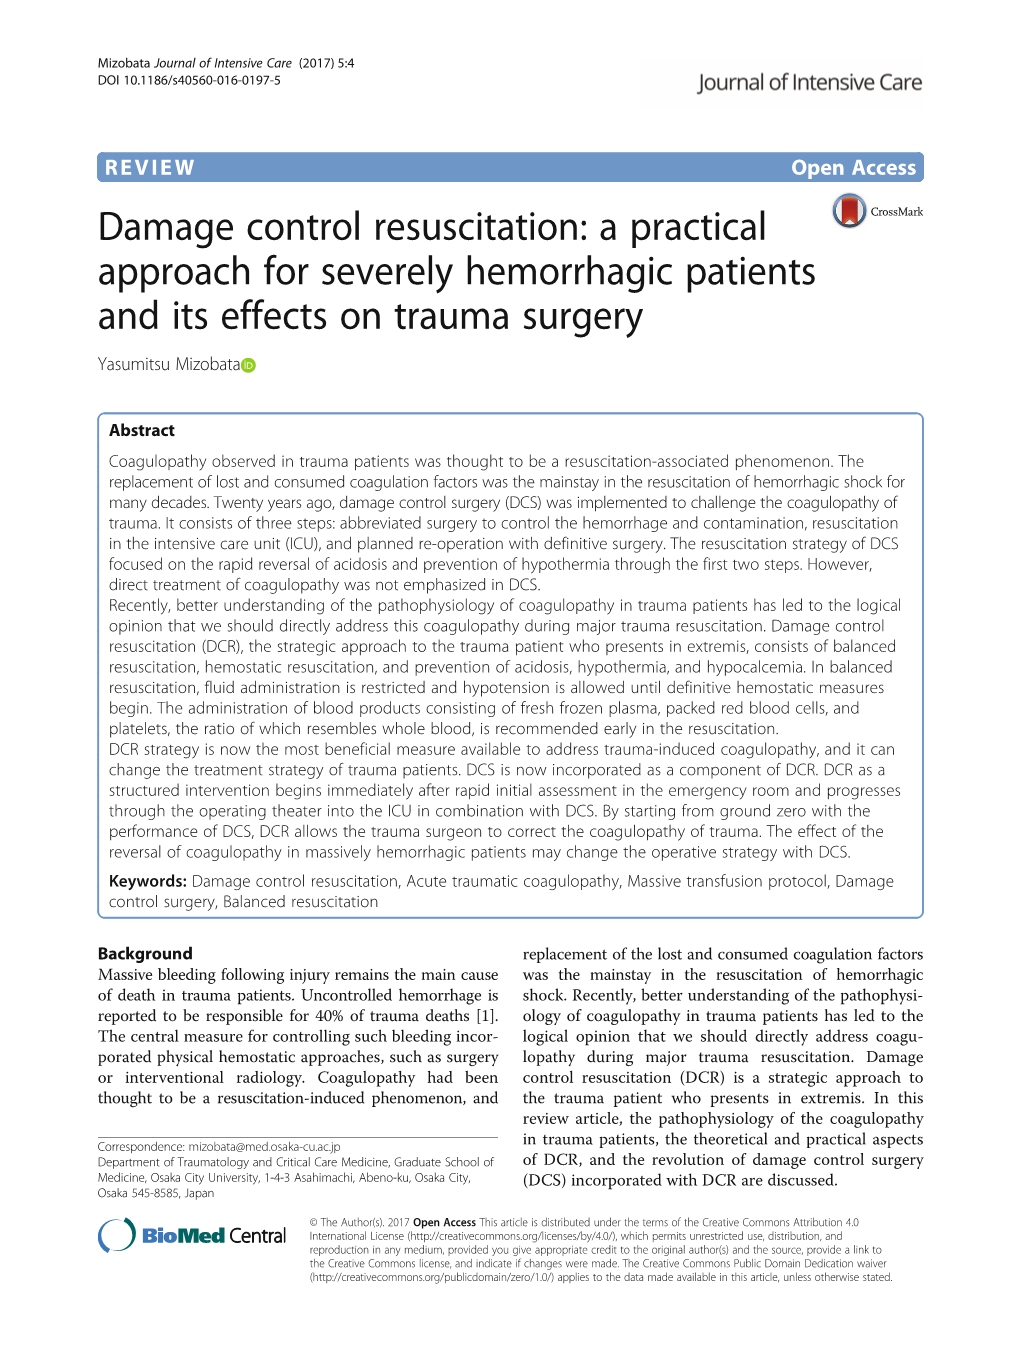 Damage Control Resuscitation: a Practical Approach for Severely Hemorrhagic Patients and Its Effects on Trauma Surgery Yasumitsu Mizobata